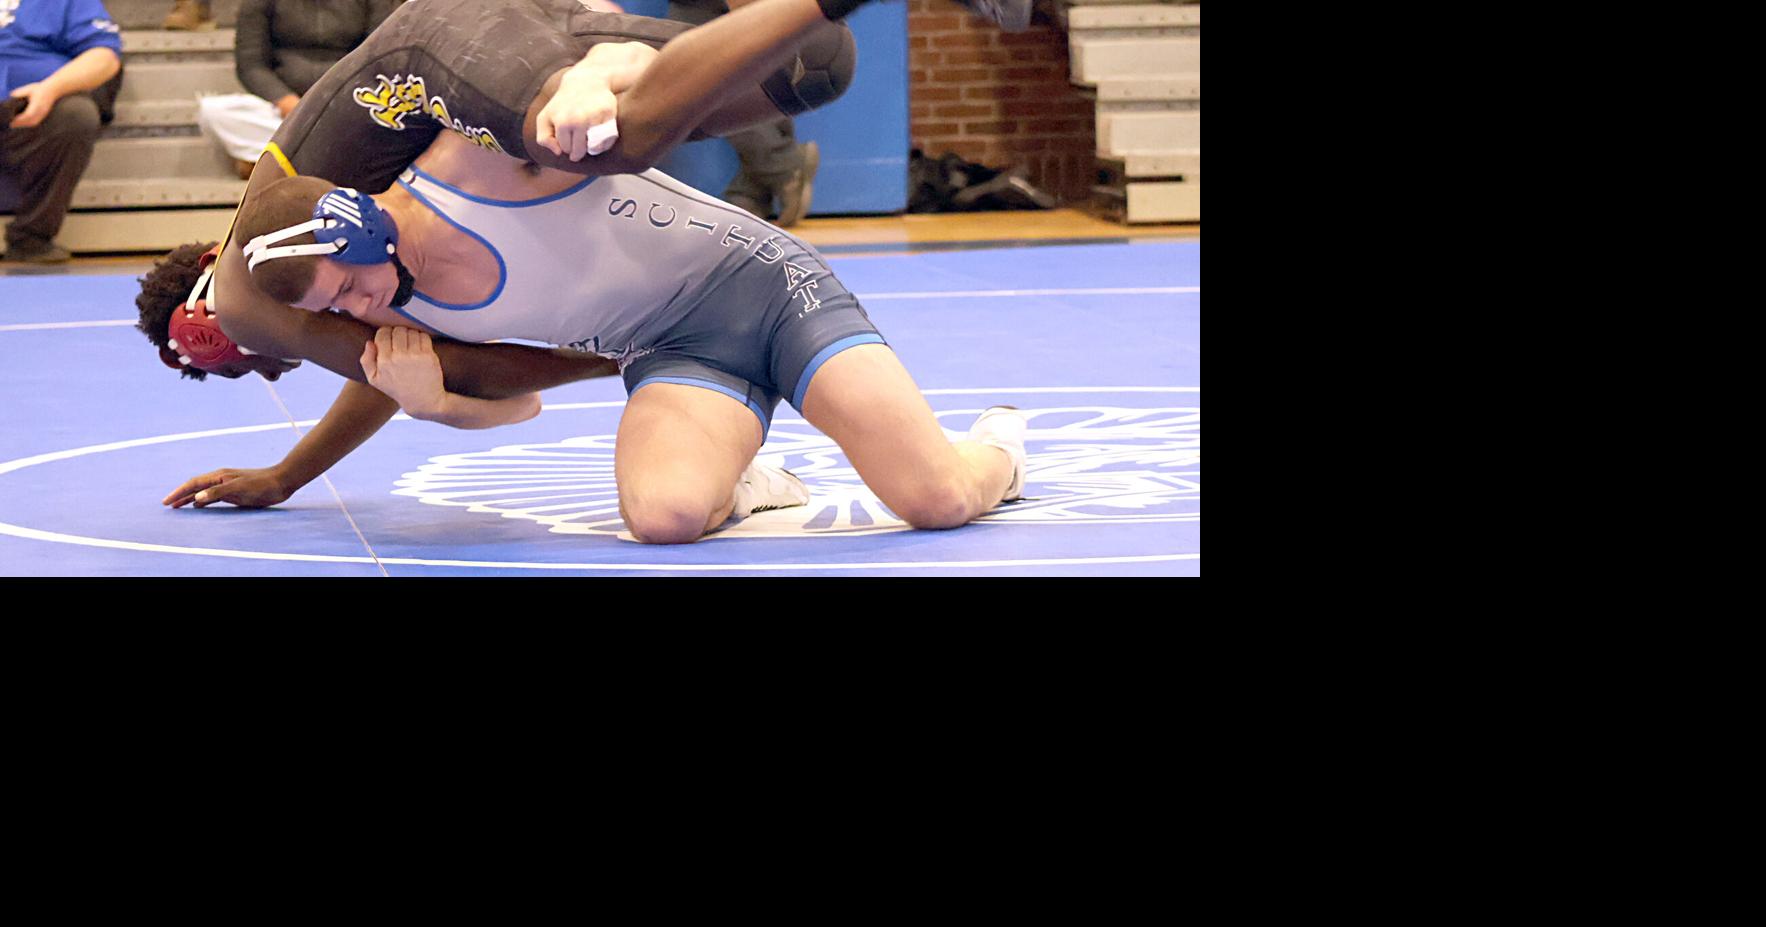 Scituate wrestling team looks to be among D-II's best in fifth varsity season